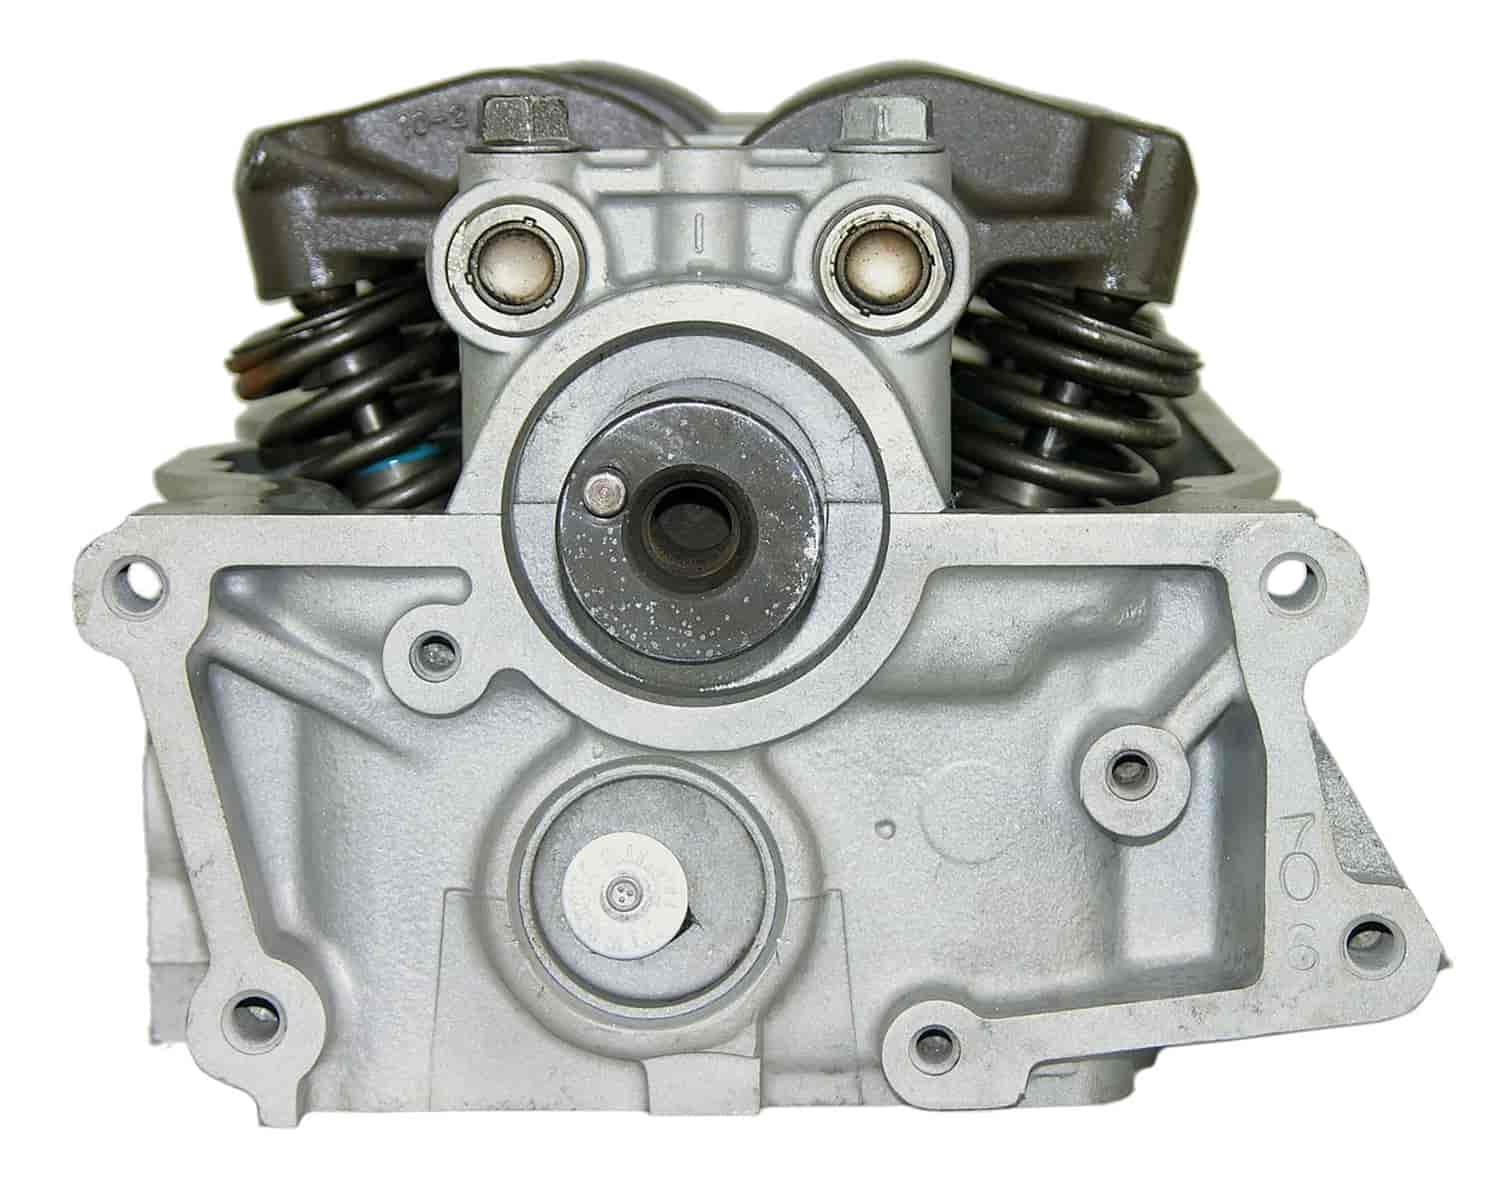 Remanufactured Cylinder Head for 1987-1989 Mitsubishi/Chrysler/Dodge/Eagle/Plymouth with 3.0L V6 6G72